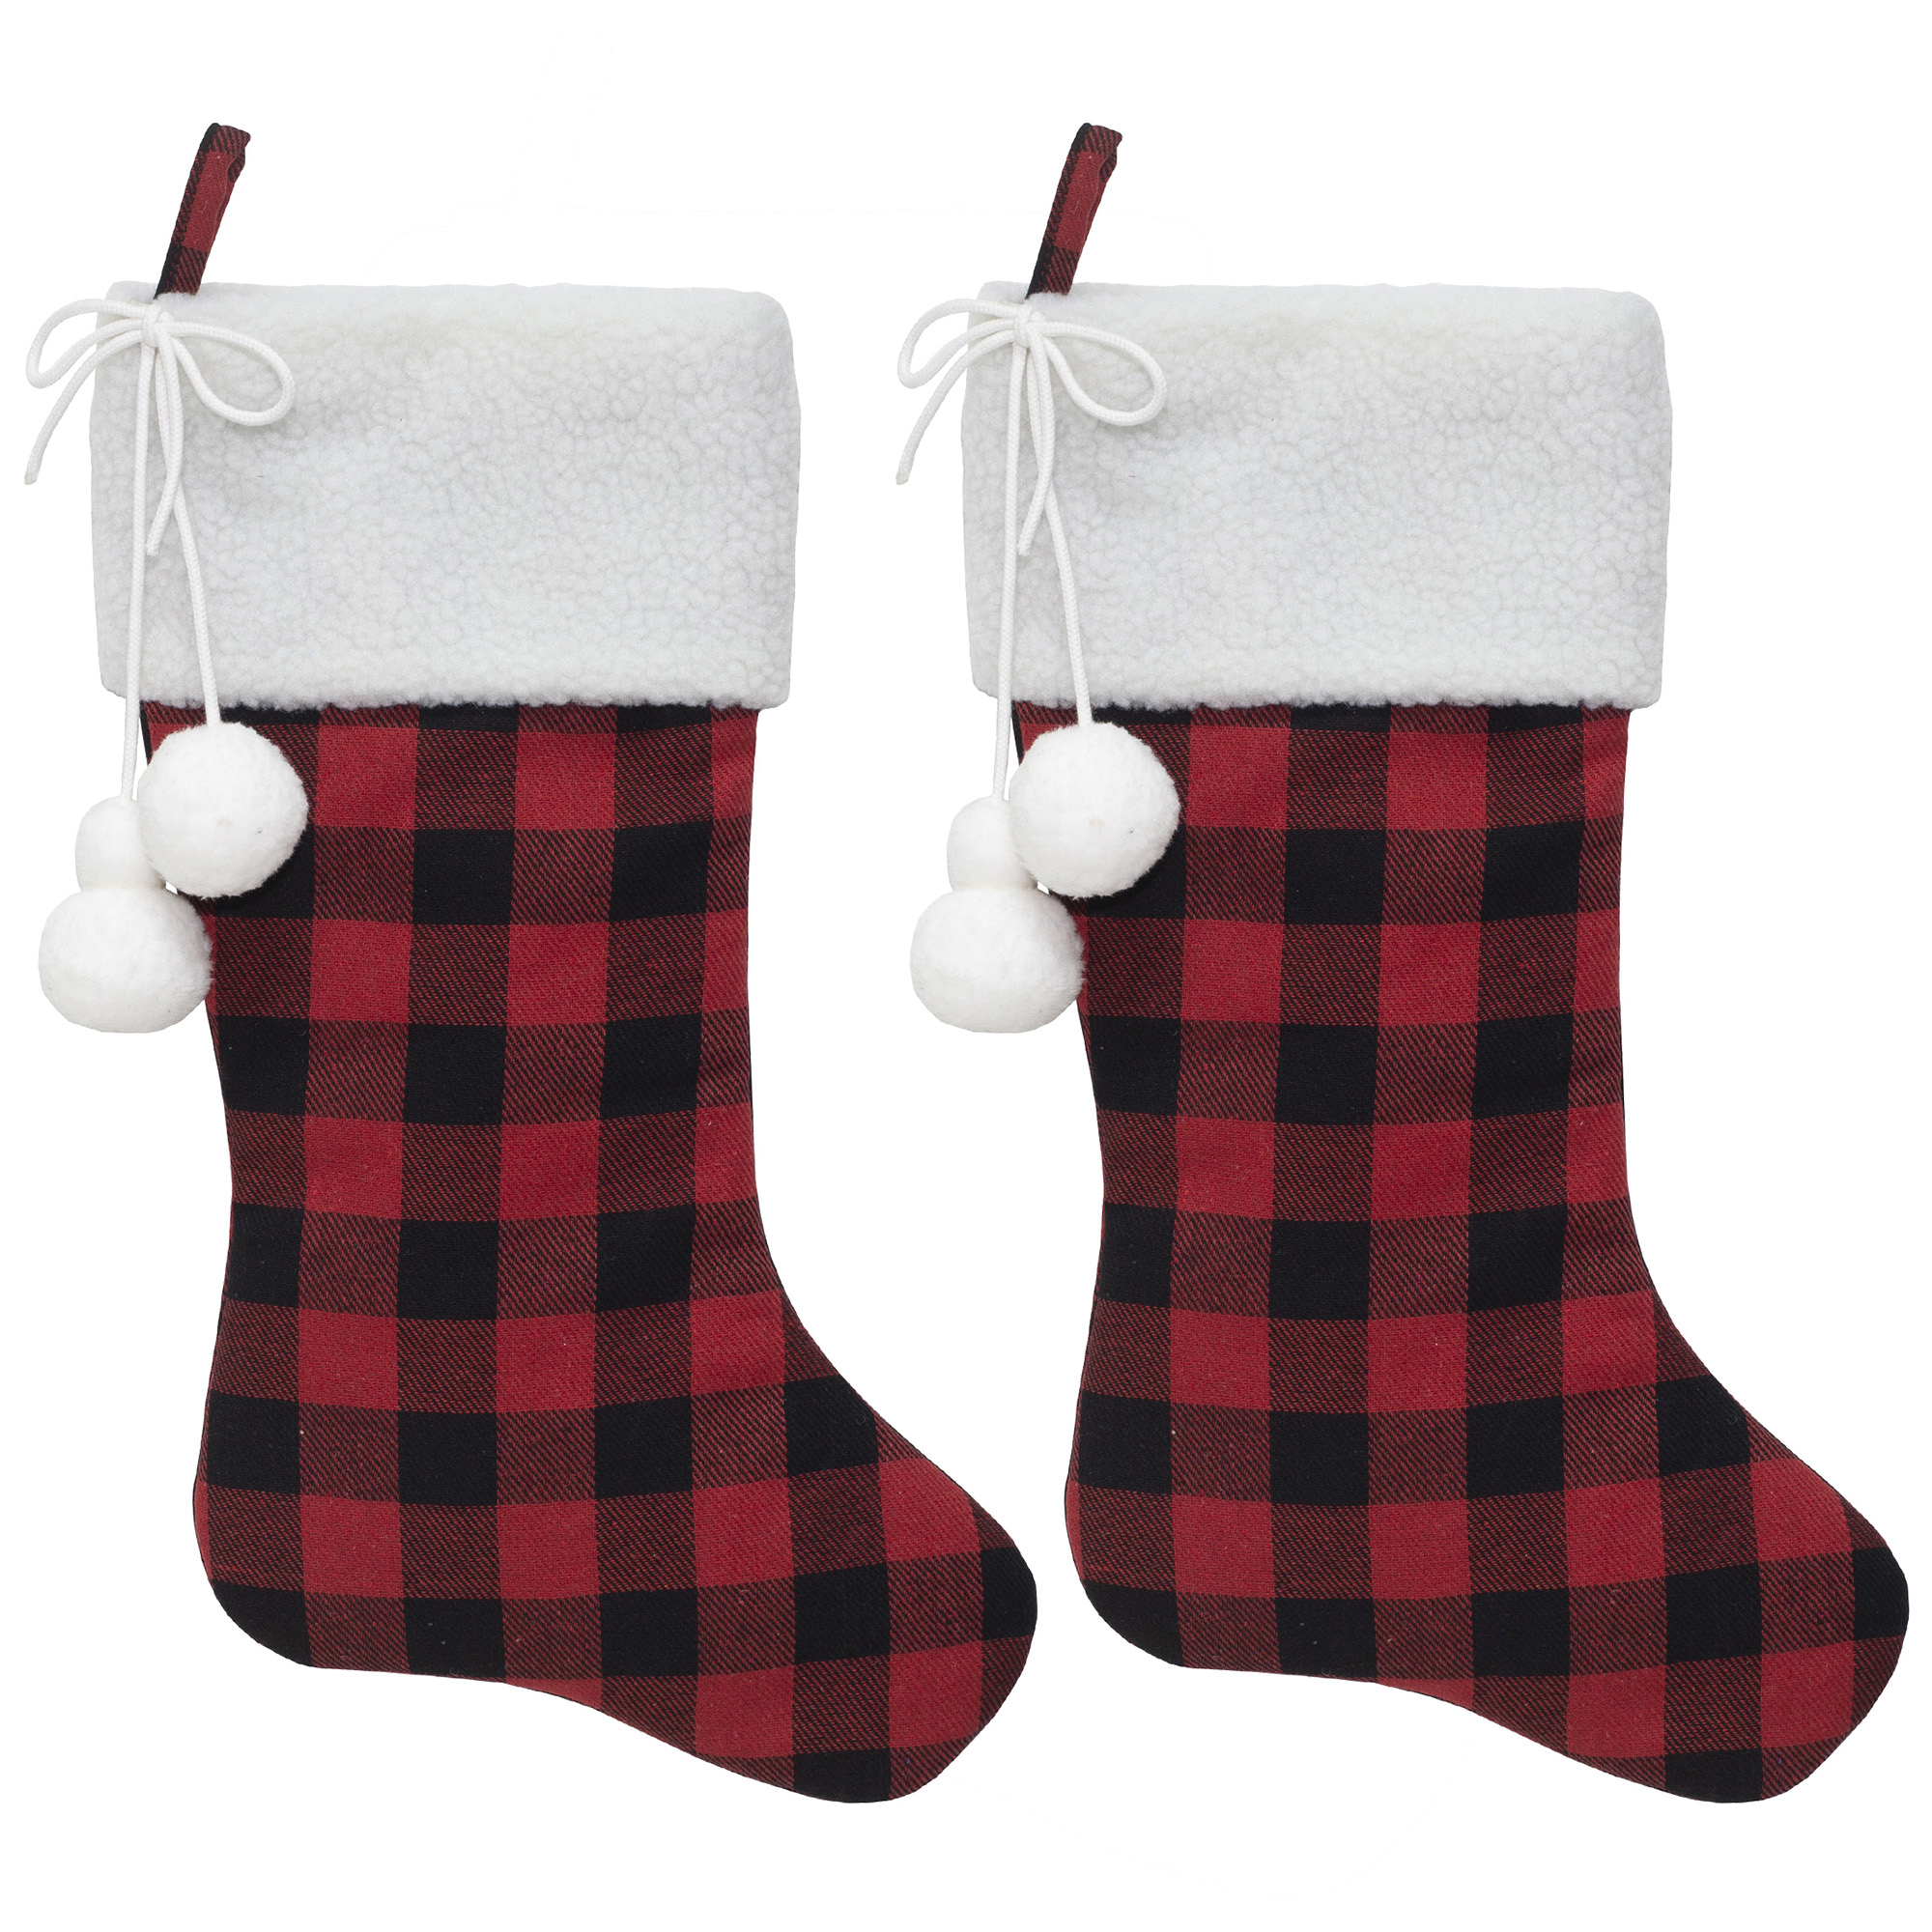 Holiday Time Assorted Colors Plaid Sherpa Christmas Stockings, 10" (2 Count) - image 1 of 3